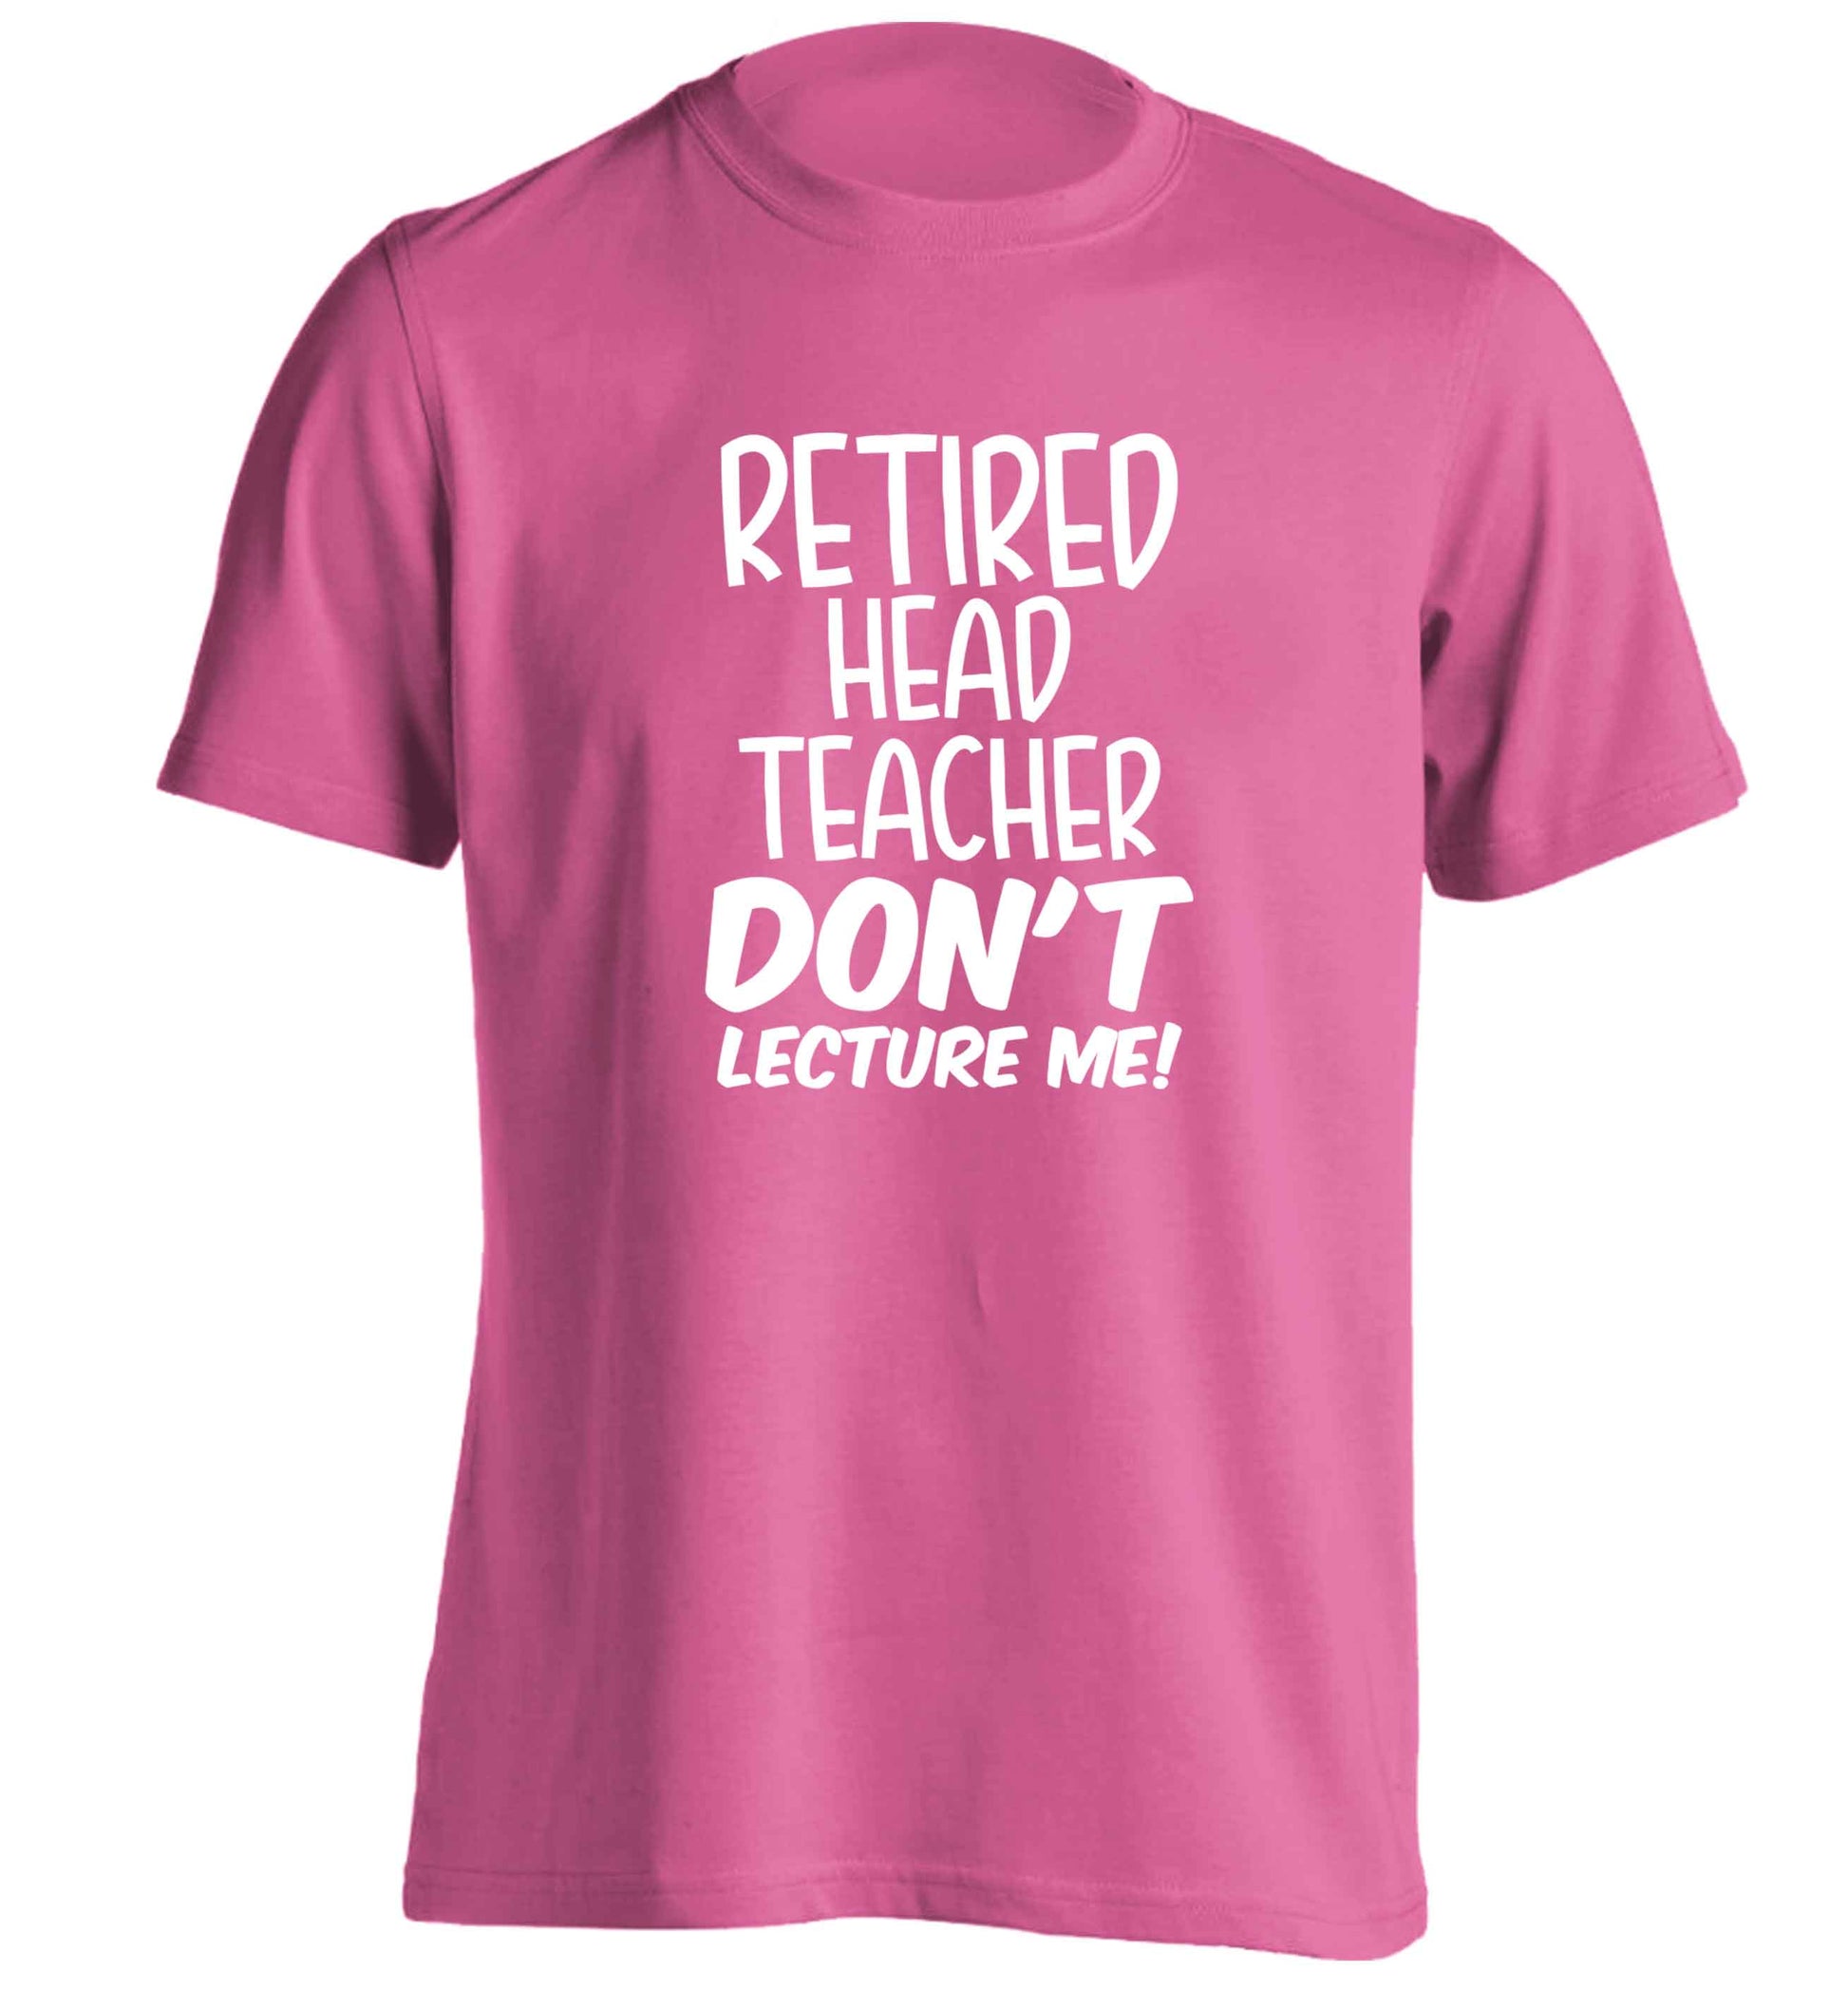 Retired head teacher don't lecture me! adults unisex pink Tshirt 2XL